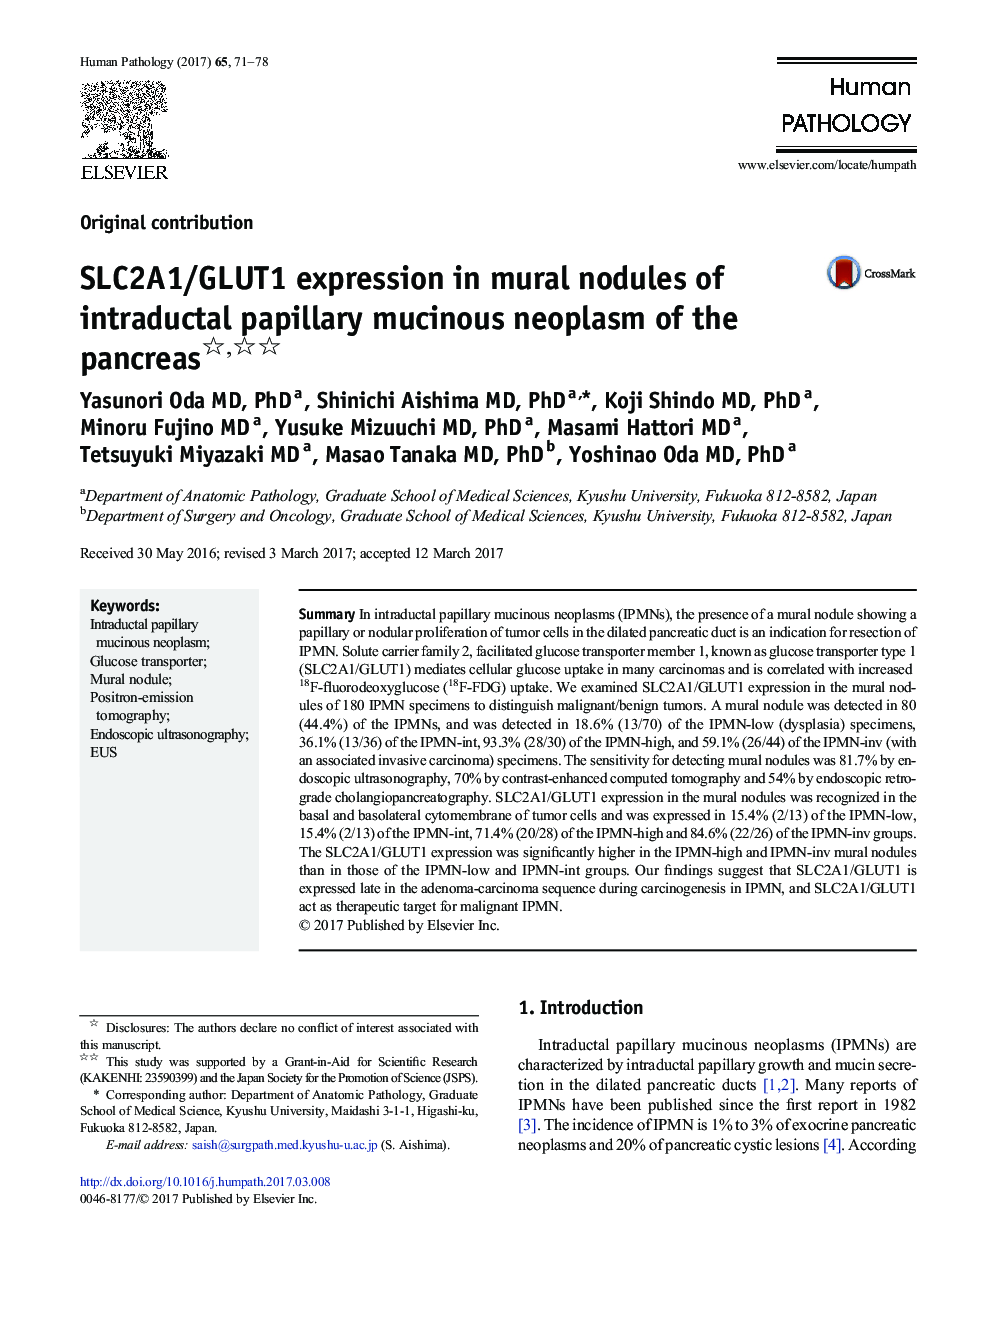 Original contributionSLC2A1/GLUT1 expression in mural nodules of intraductal papillary mucinous neoplasm of the pancreas